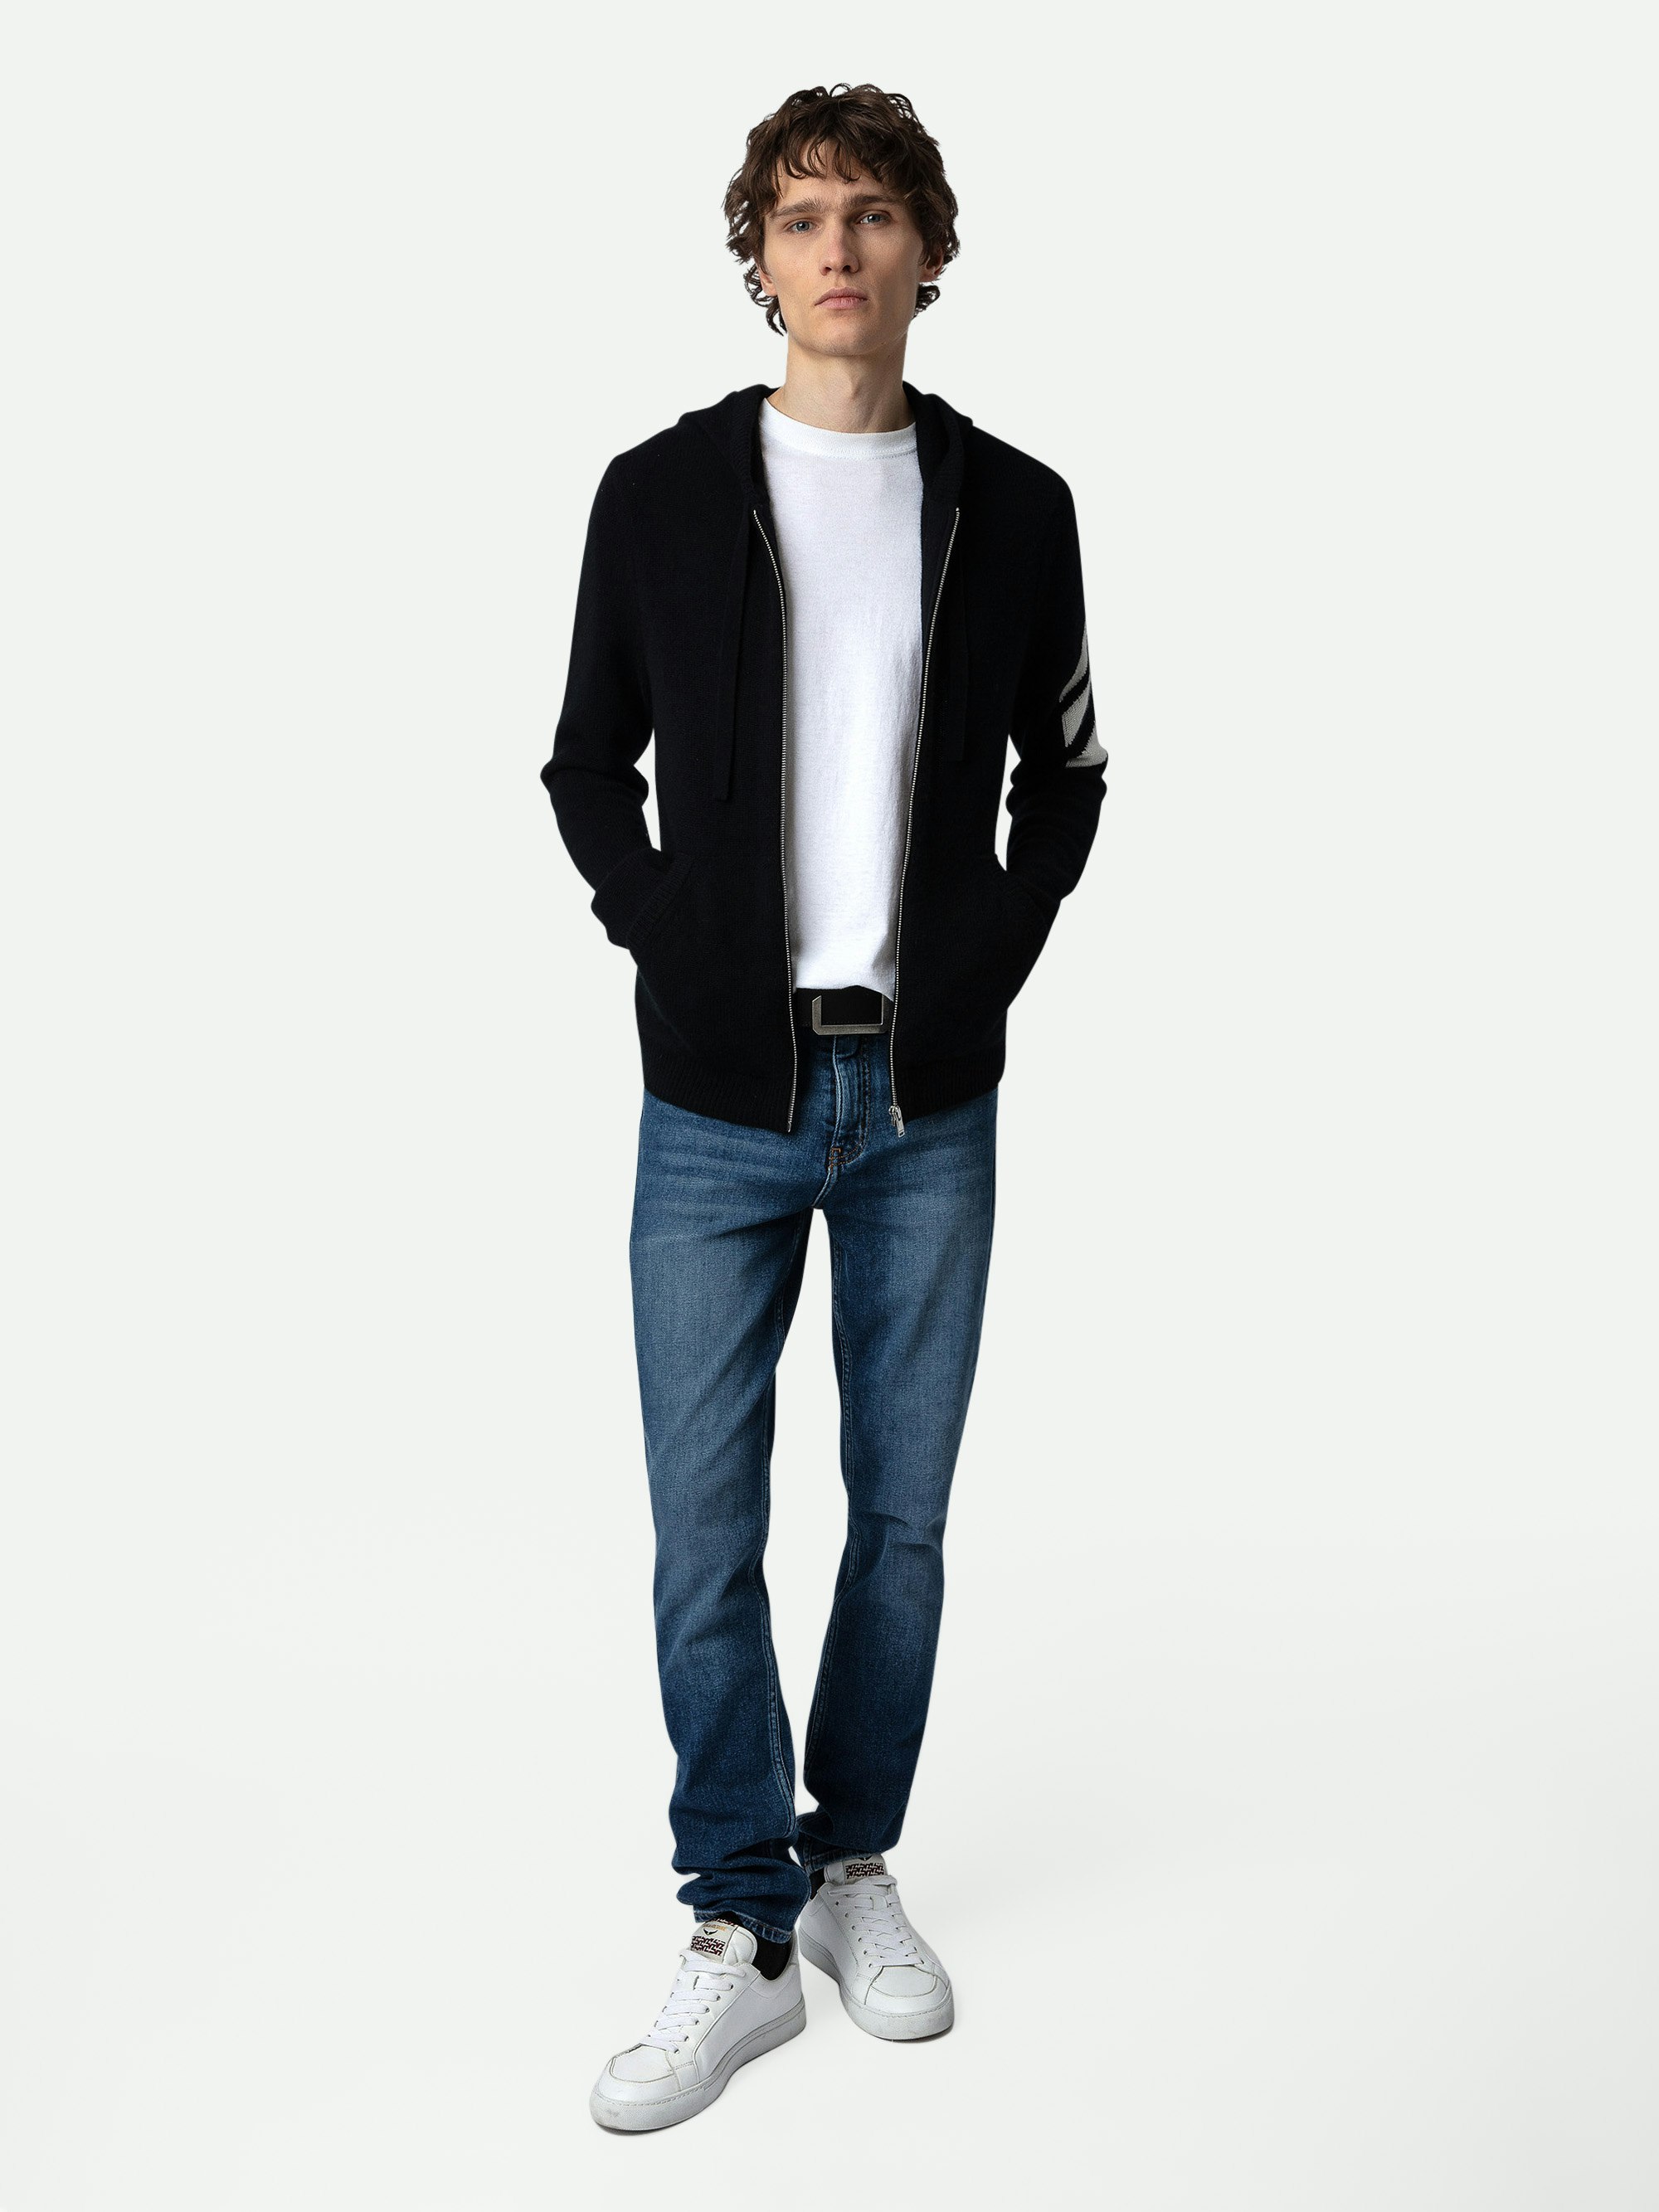 Clash Arrow Cashmere Cardigan - Long-sleeved black cashmere zip-up cardigan with hood and arrow on left arm.